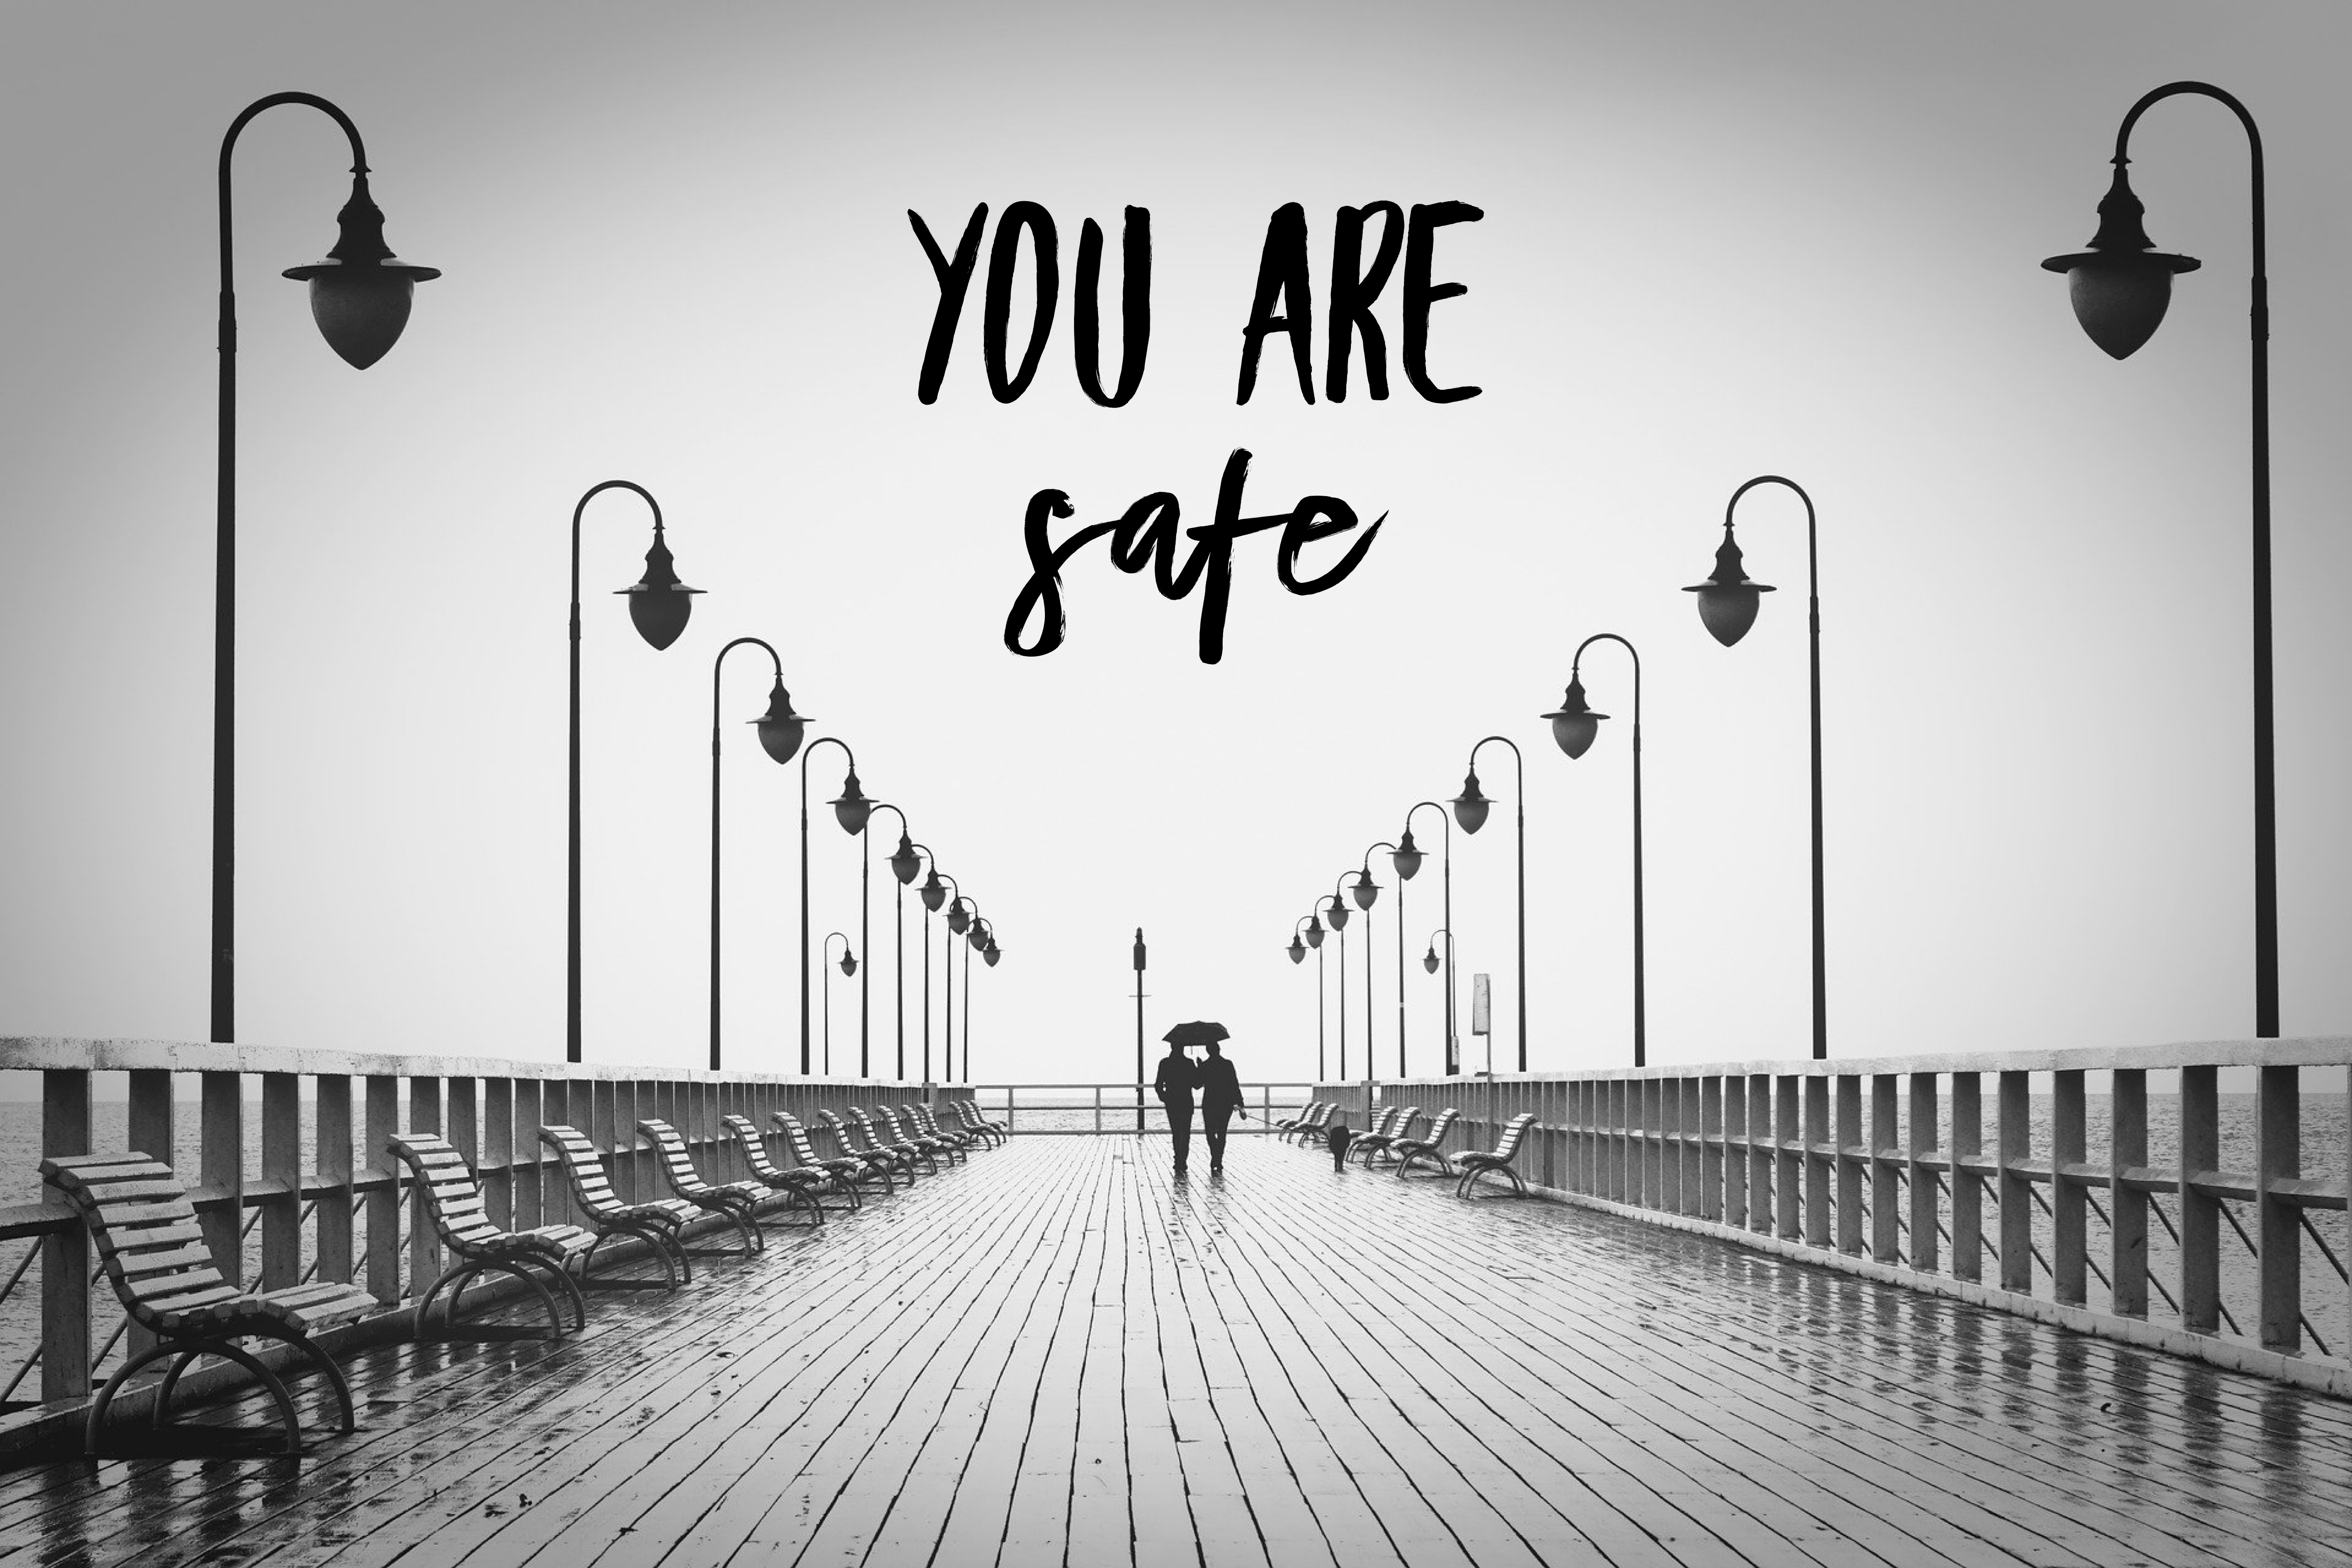 You are safe…